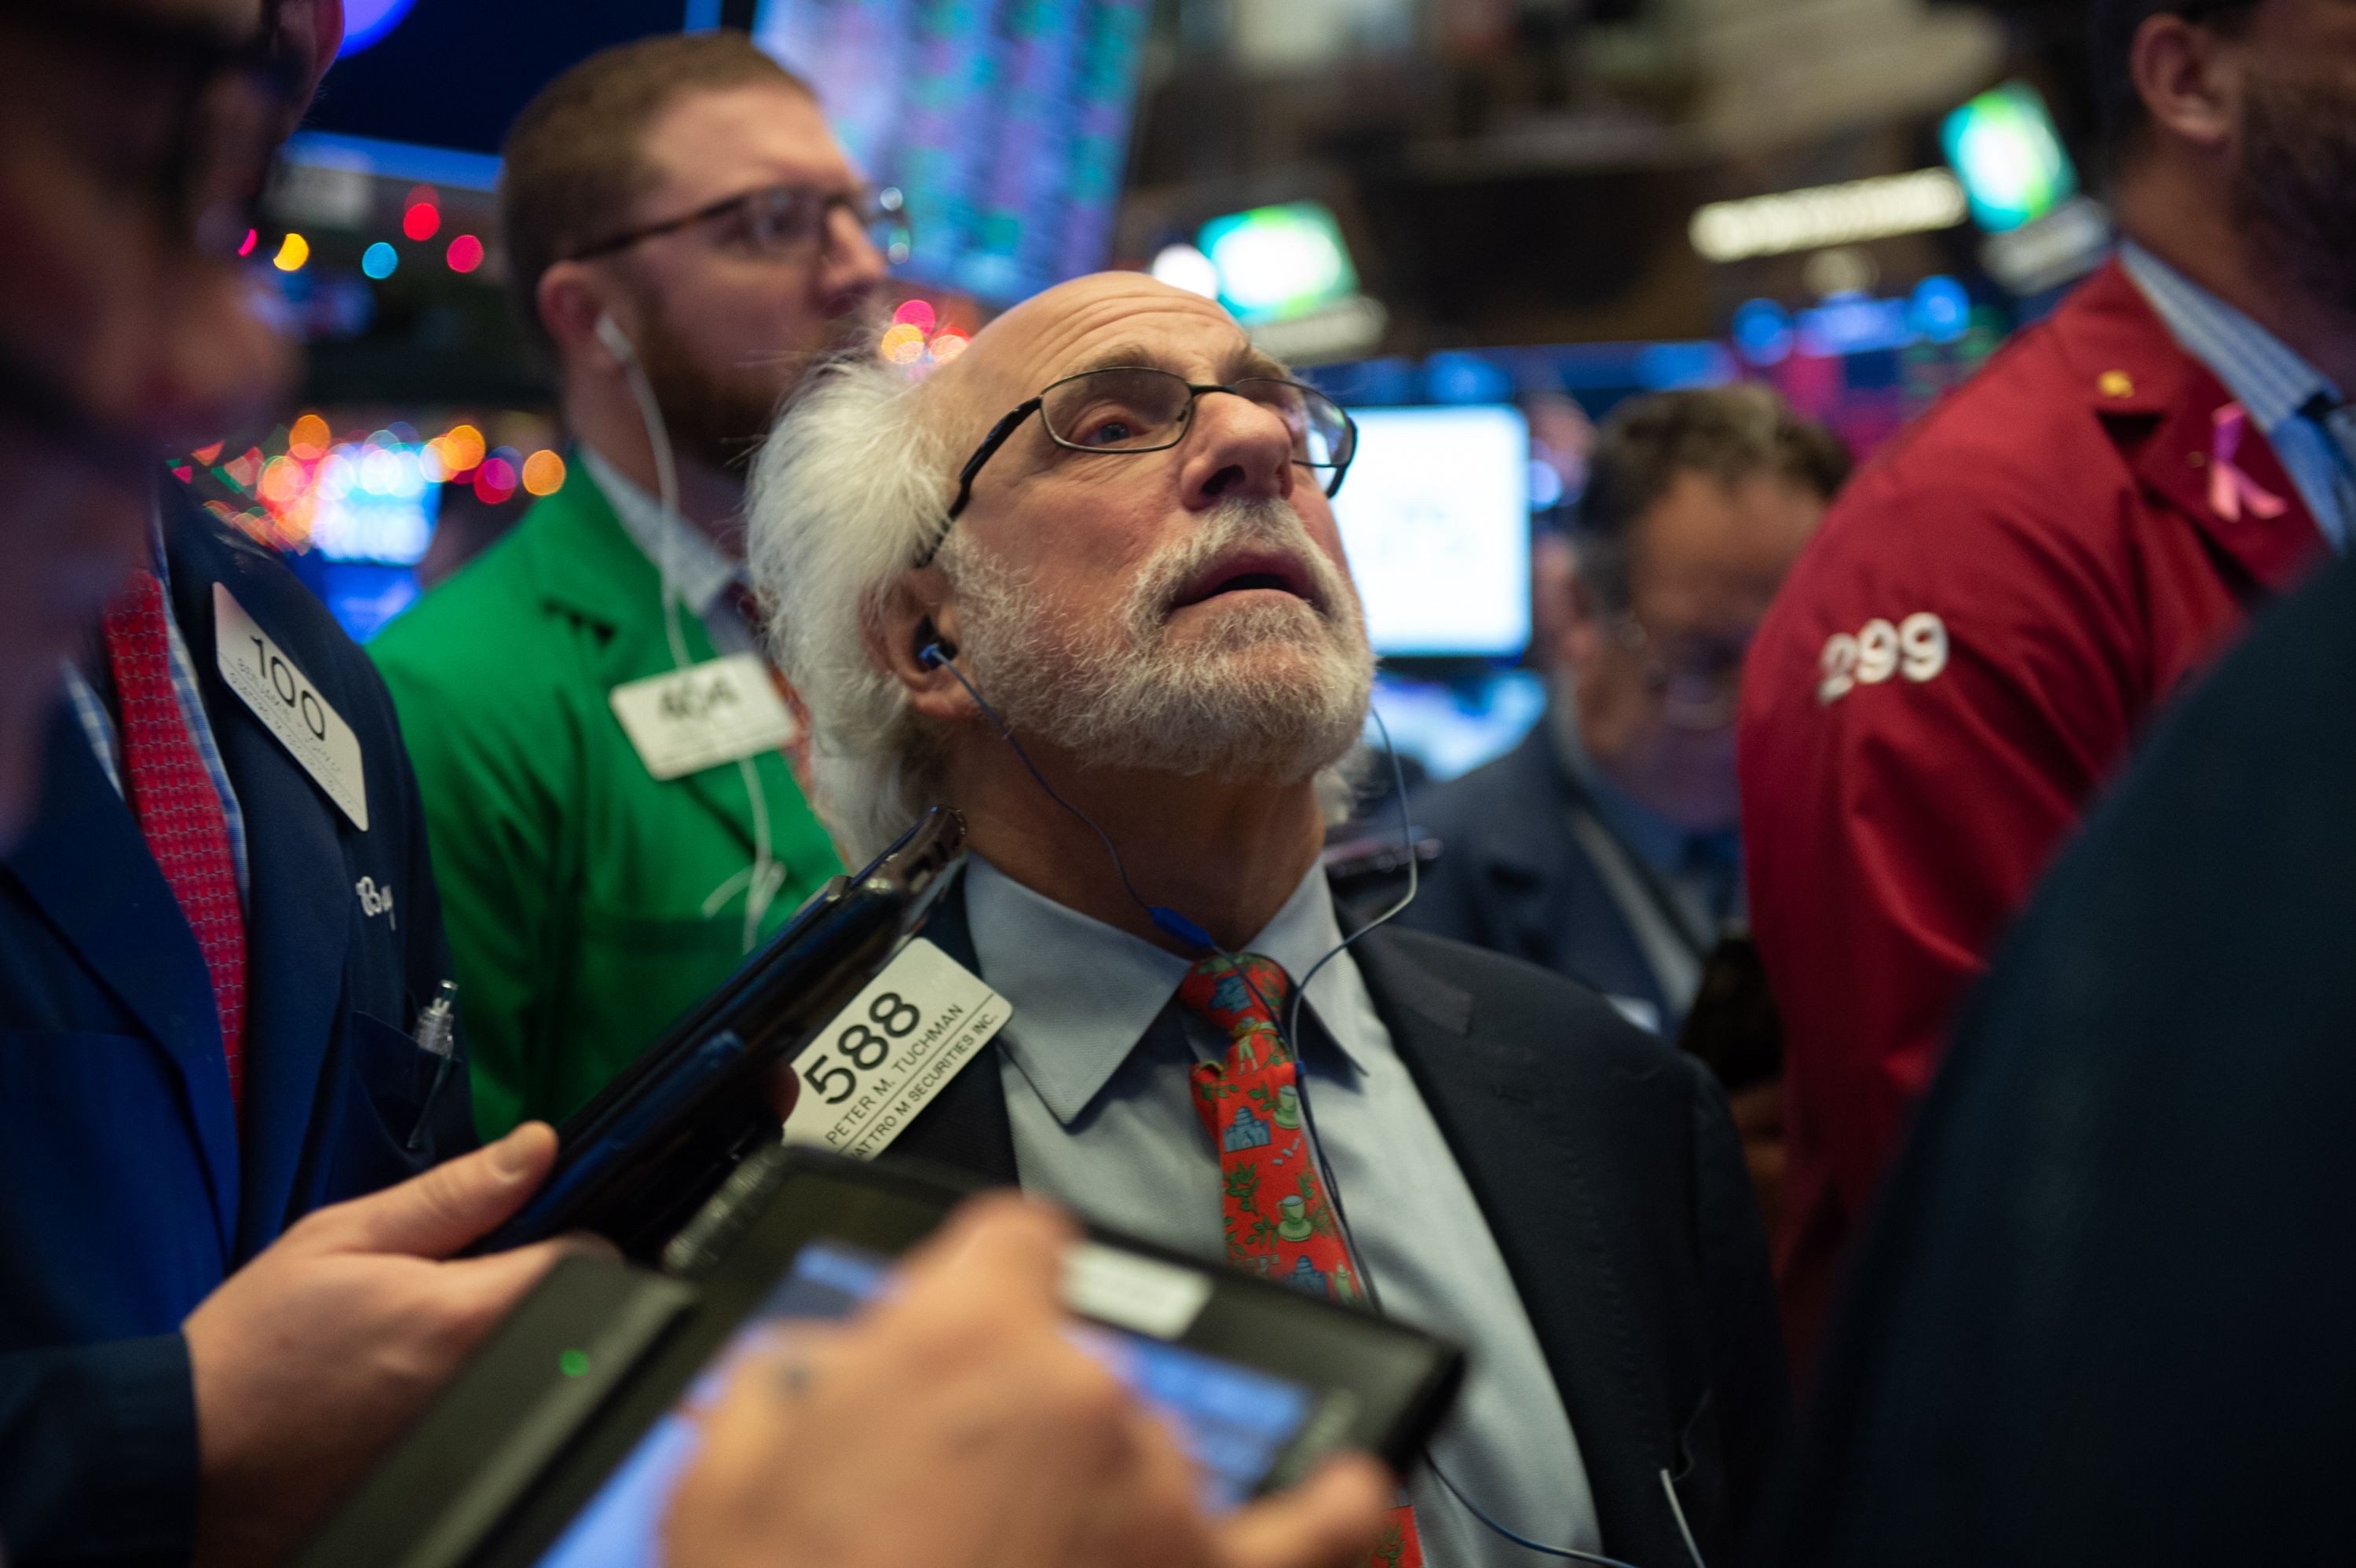 Traders work on the floor of the New York Stock Exchange on December 6. A miscommunication from the Fed can have amplified market effects, even if the statements contain a degree of truth. Photo: AFP